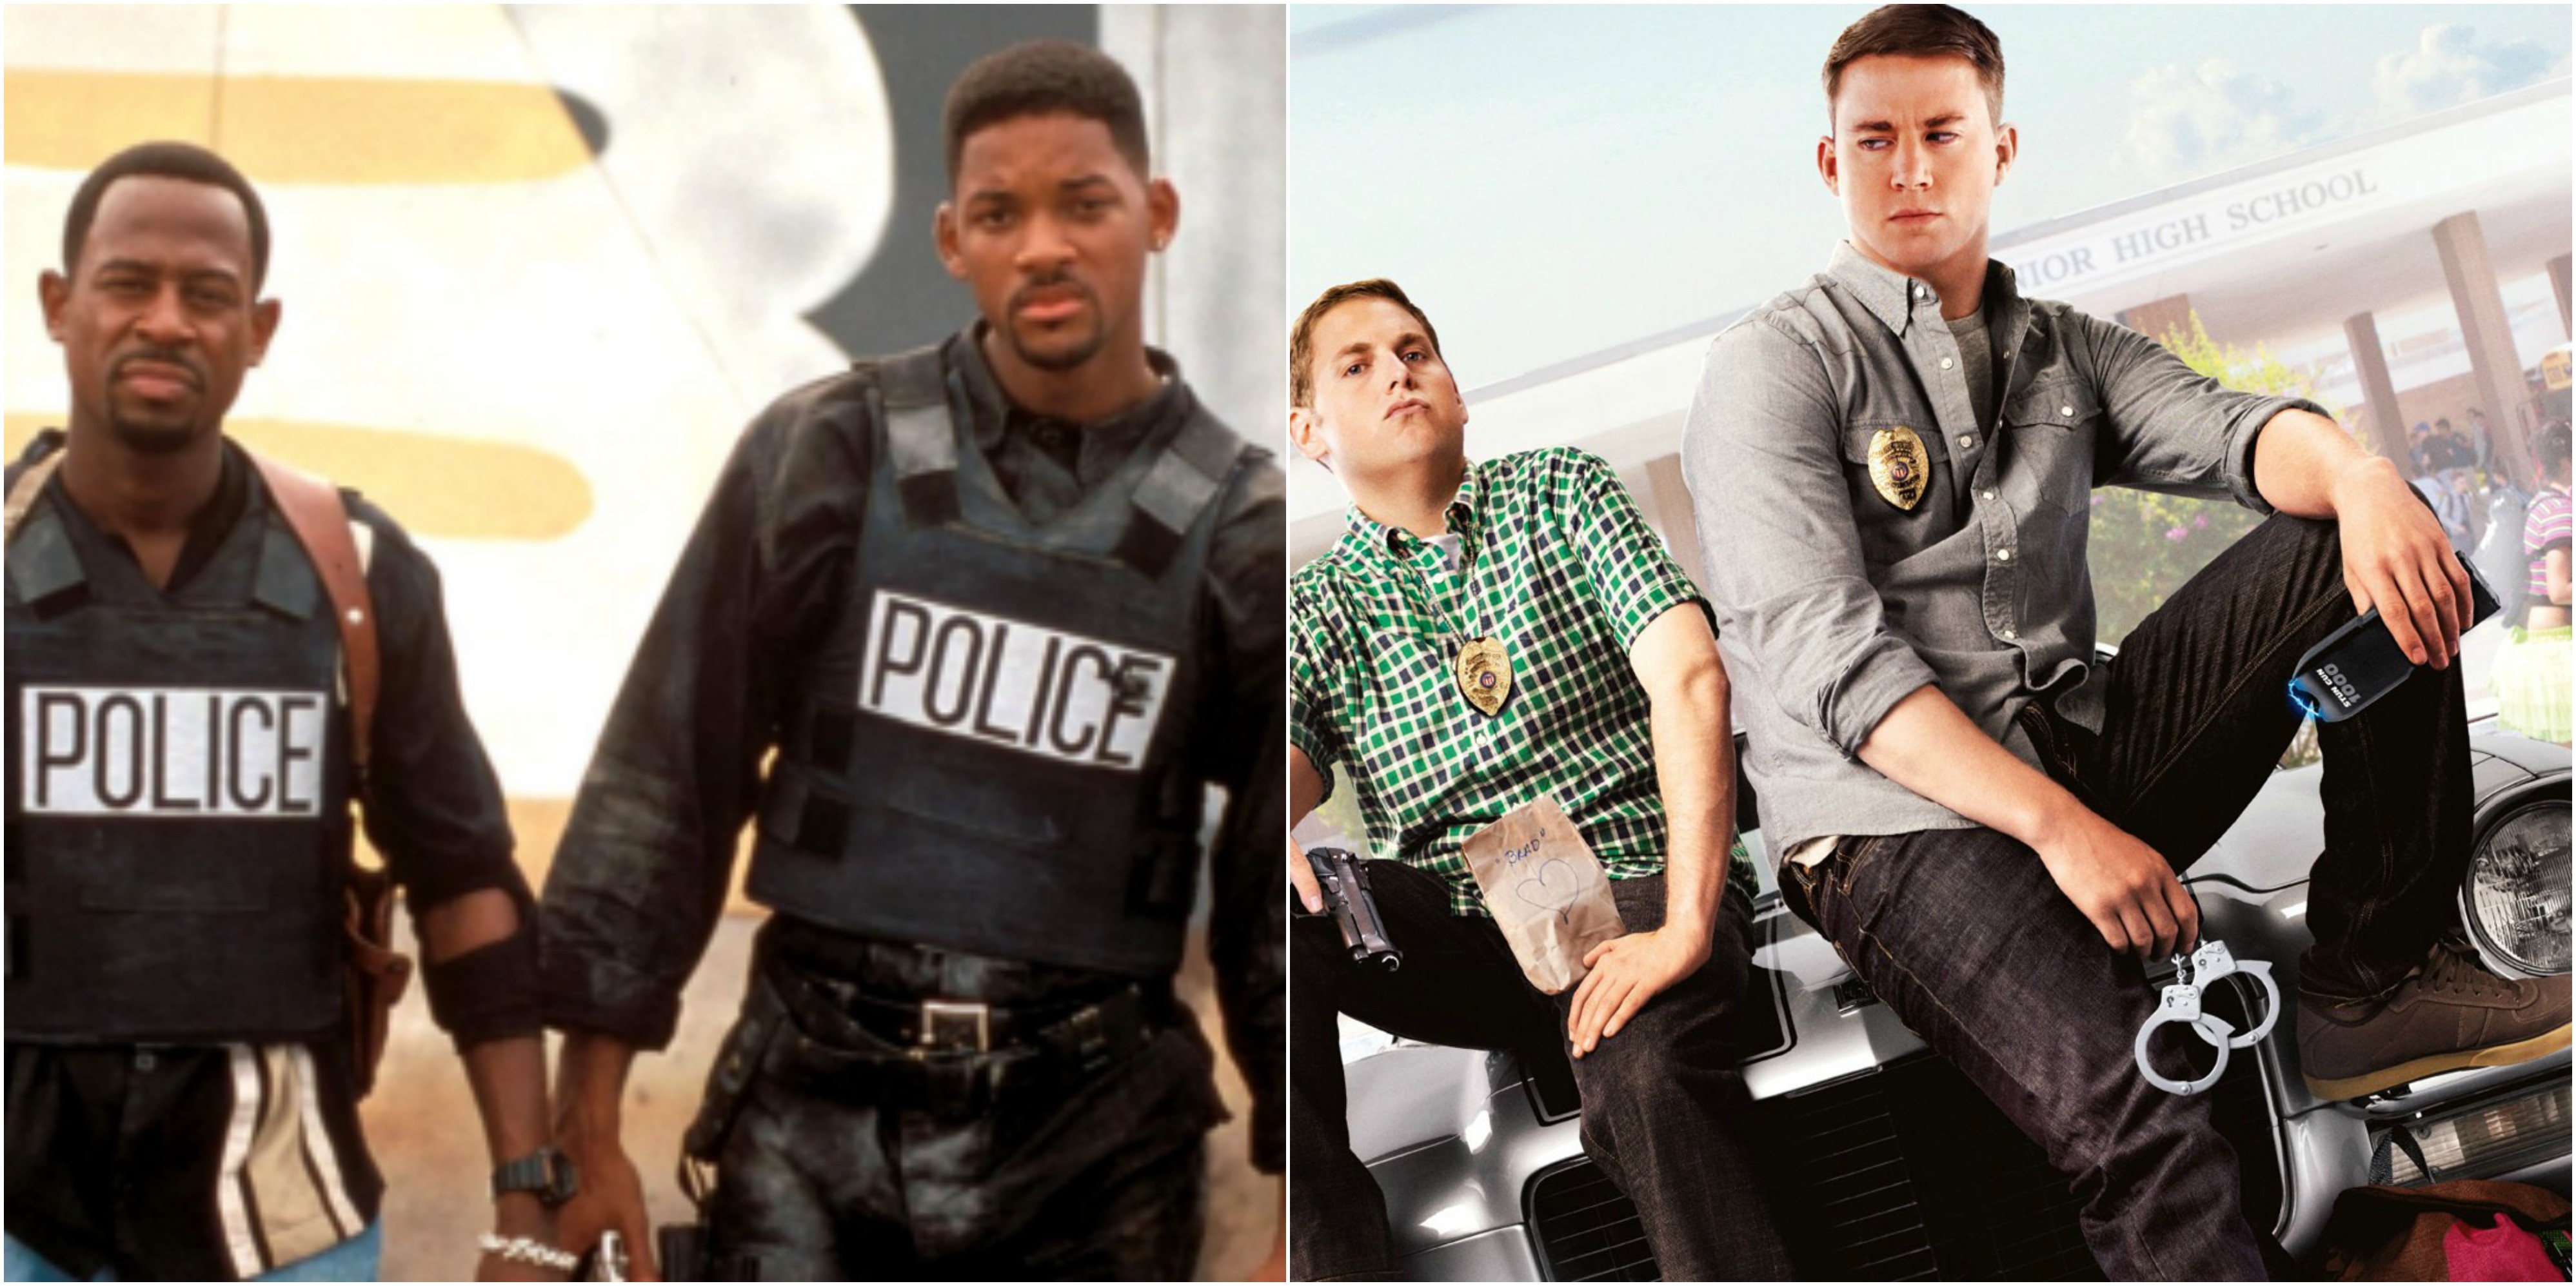 Episode 50: Bad Boys on Jump Street (The Bad Boys and 21 Jump Street Crossover)